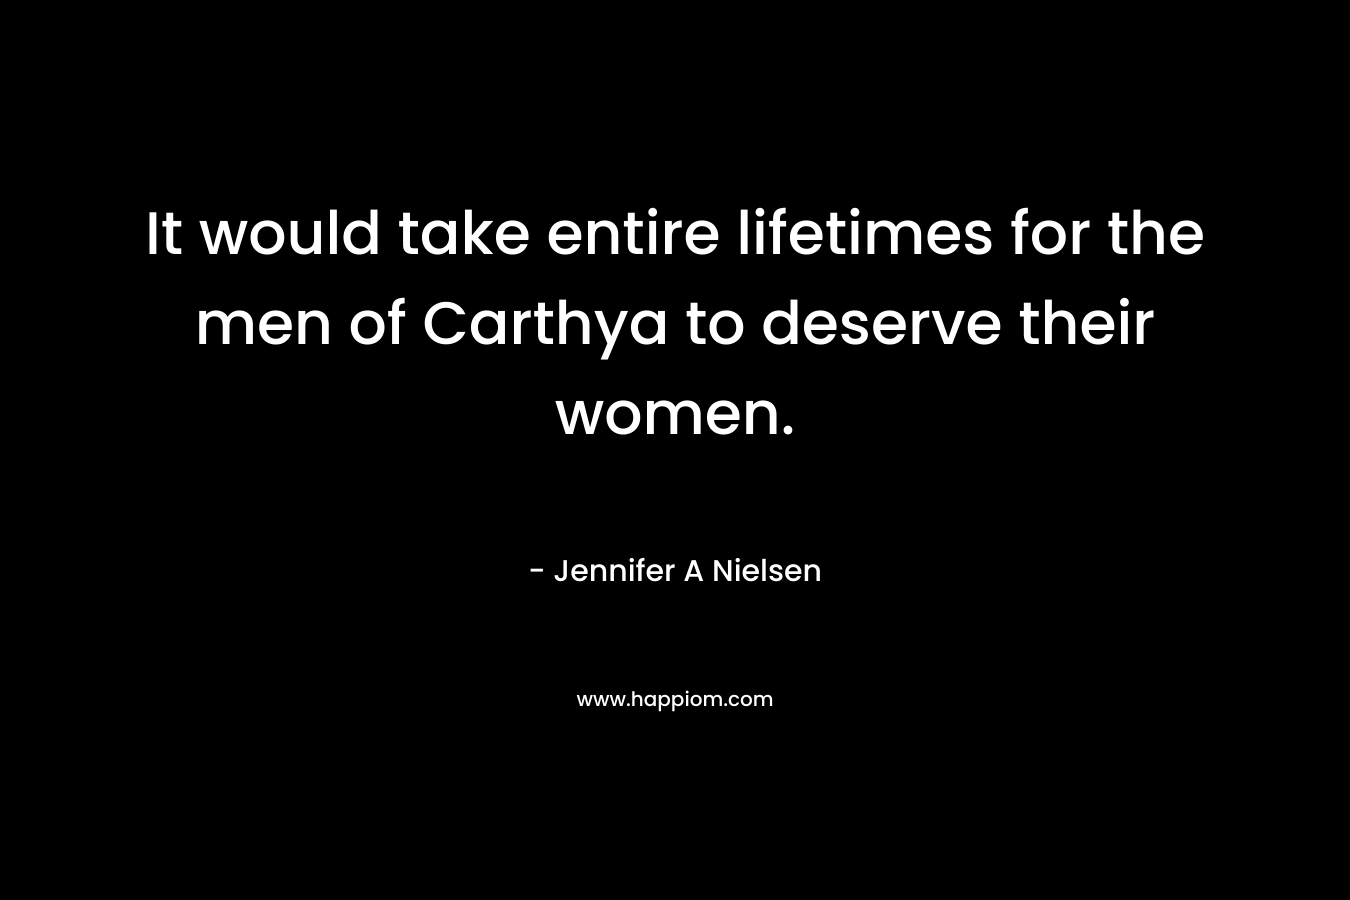 It would take entire lifetimes for the men of Carthya to deserve their women. – Jennifer A Nielsen